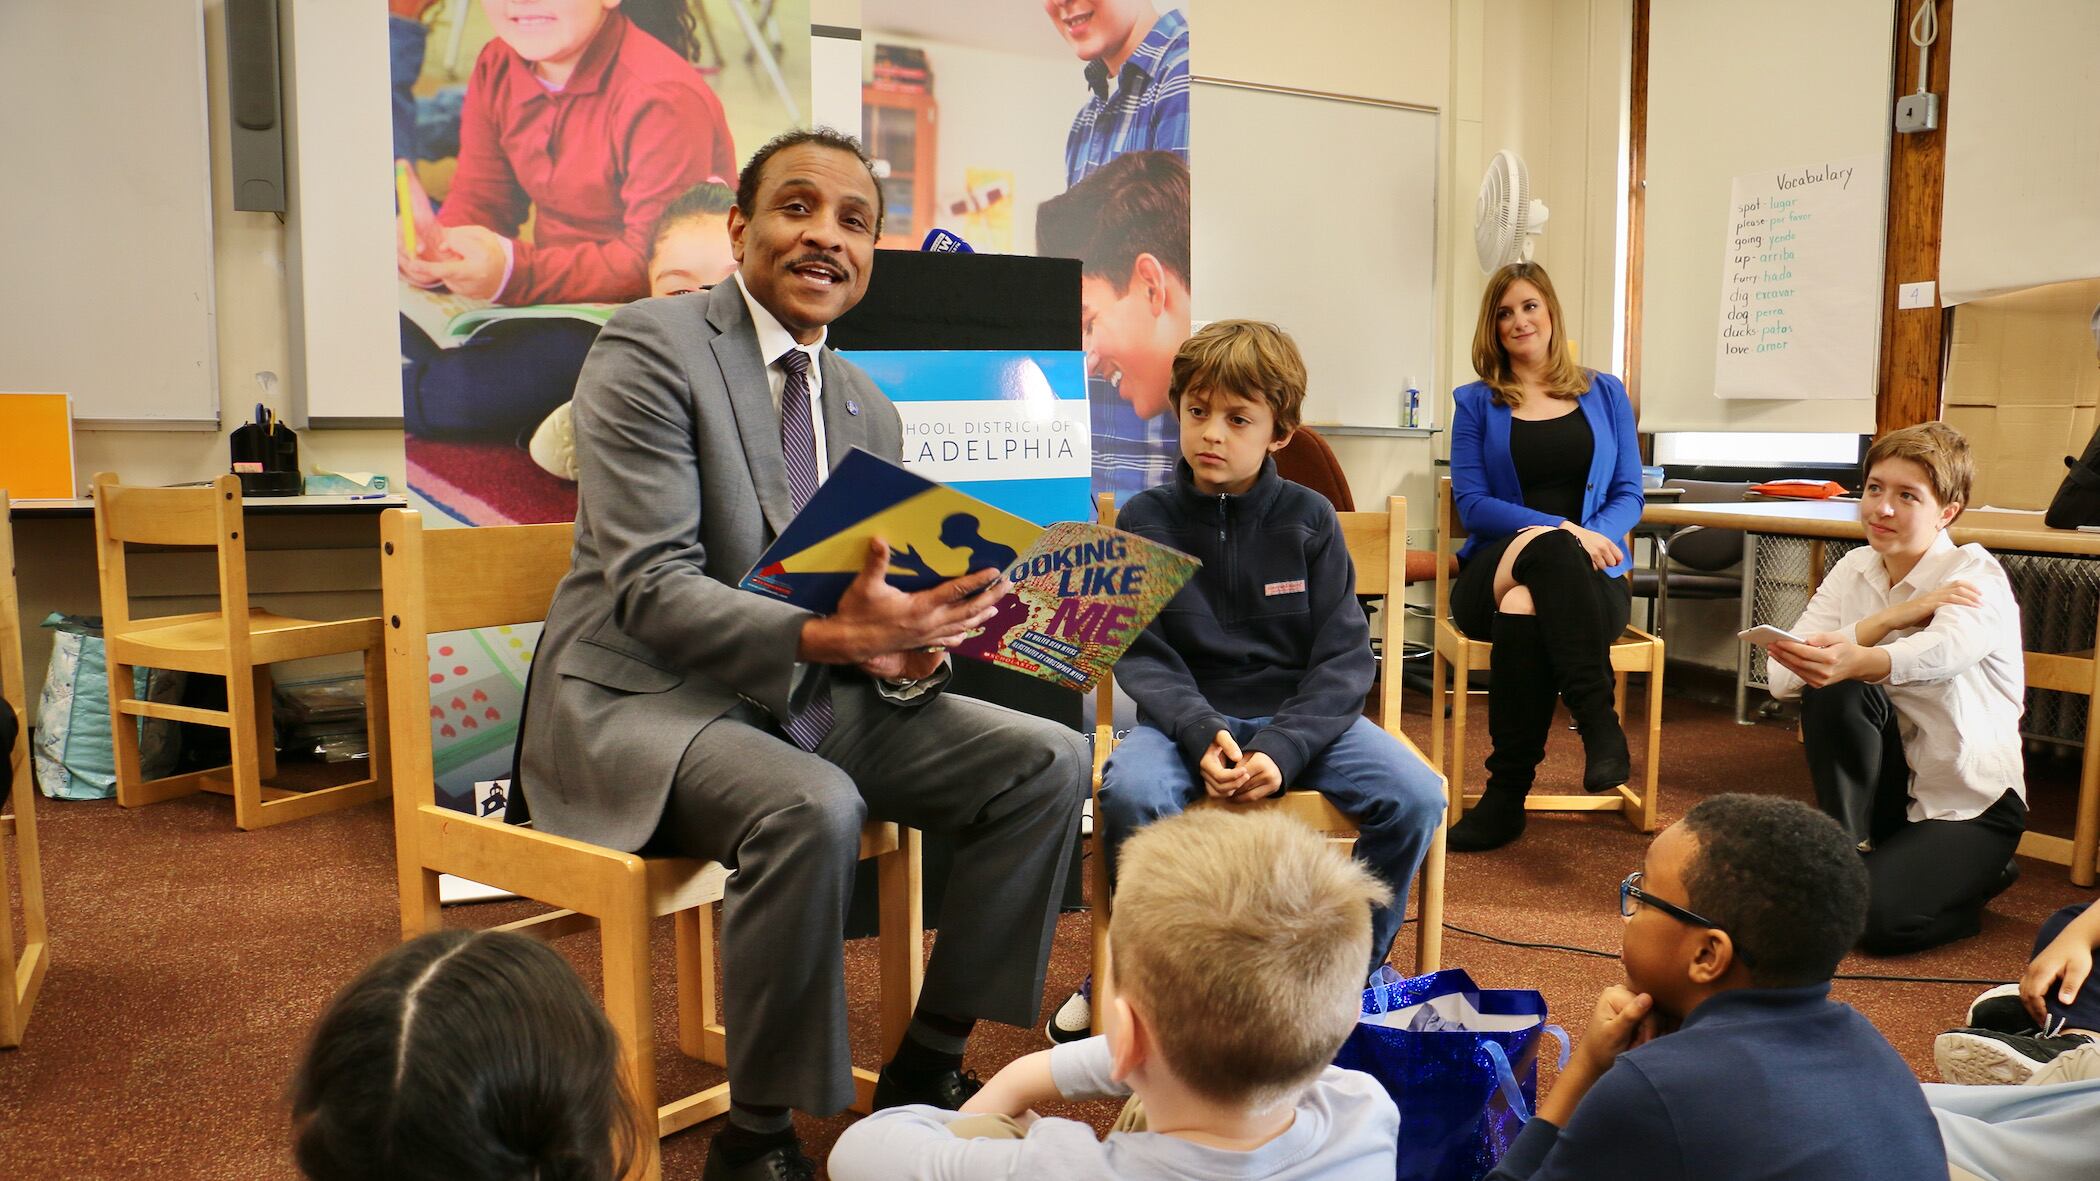 A man in a gray suit and dark tie sits on a chair reading a book aloud. A boy in a blue shirt and jeans sits next to him. Students sit on the floor listening. A teacher wearing a black dress, black boots, and a bright blue jacket sits to the left of him.